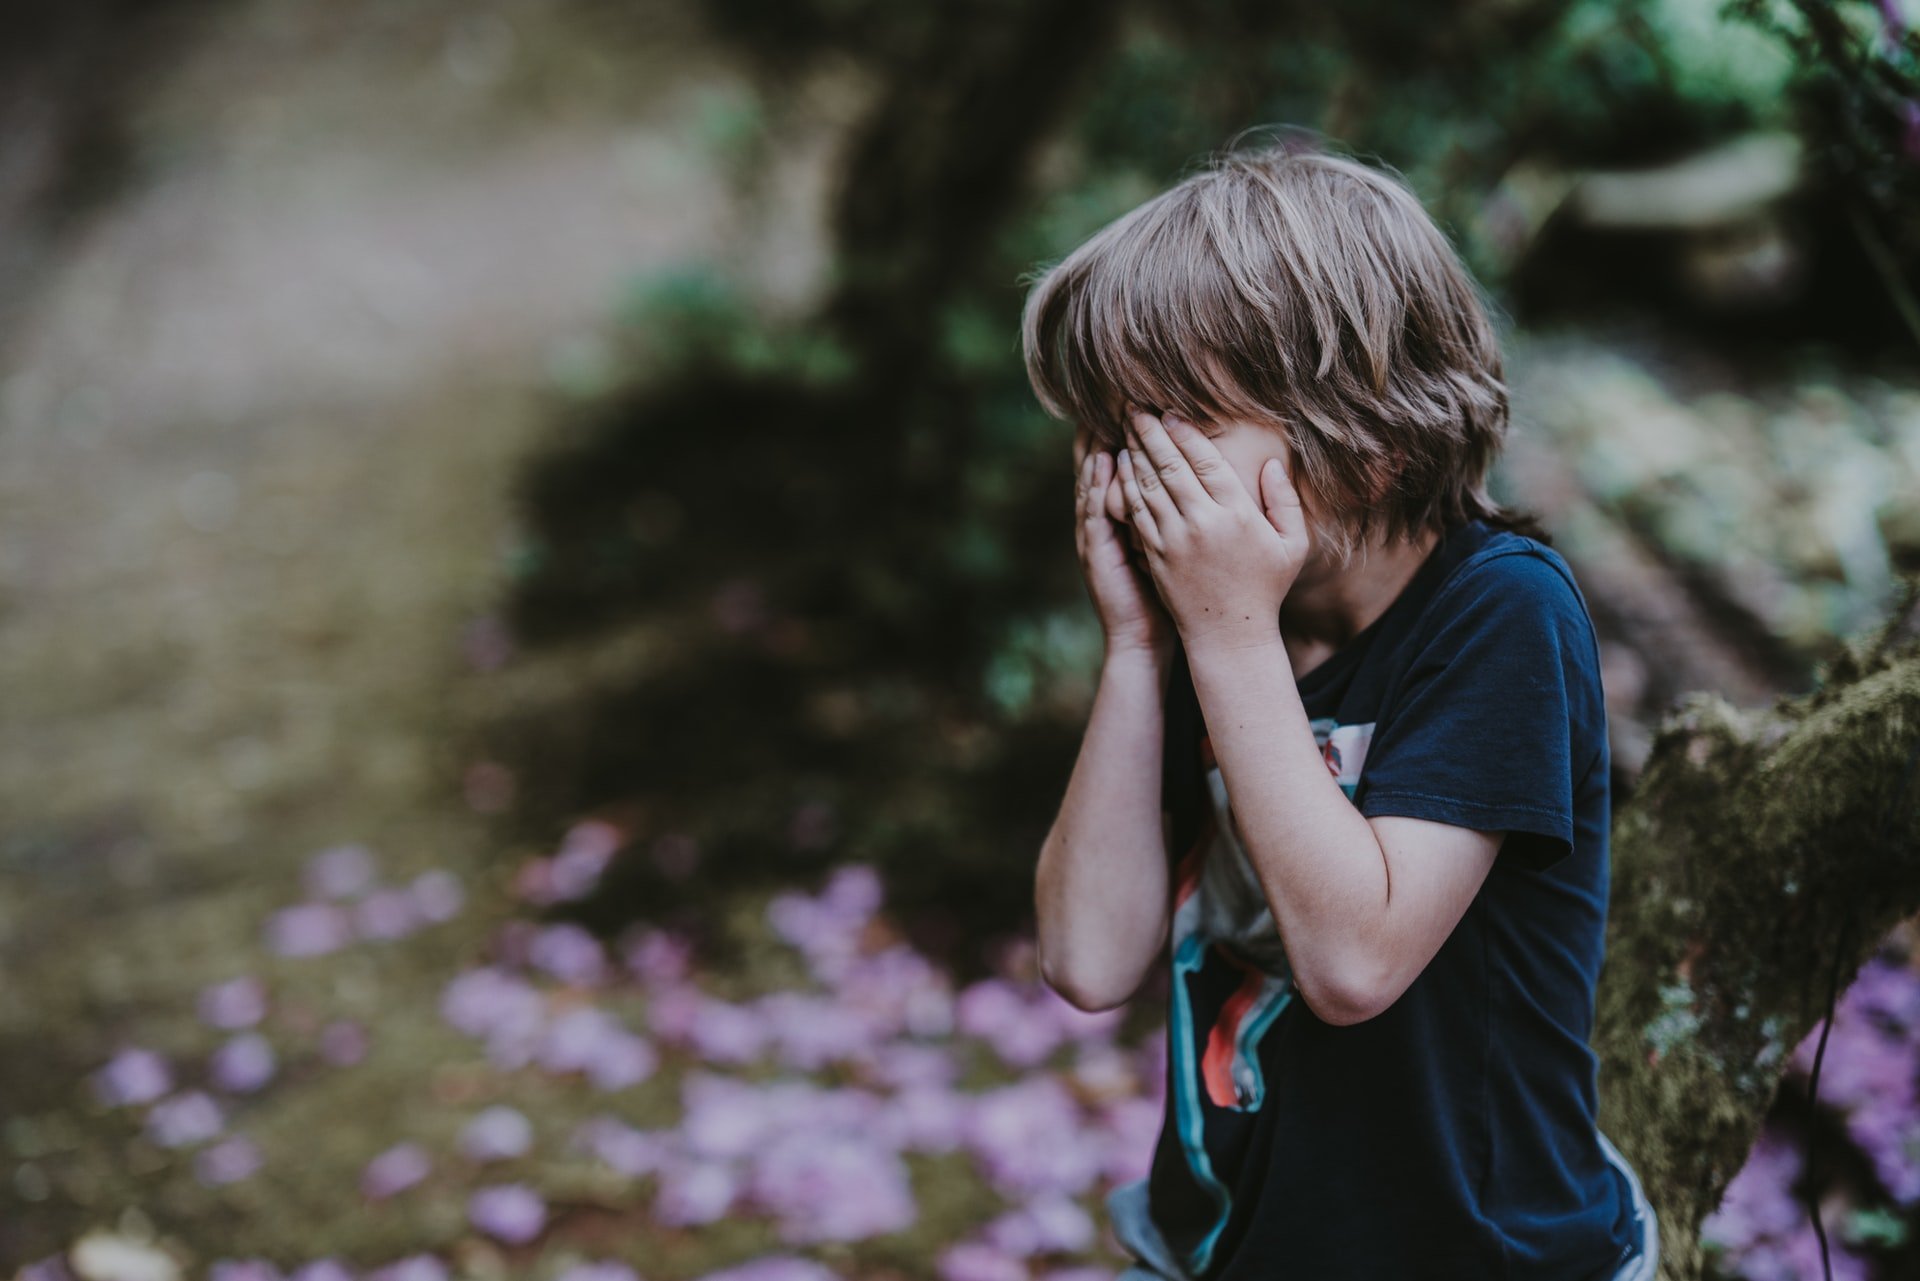 Her son was crying | Source: Unsplash